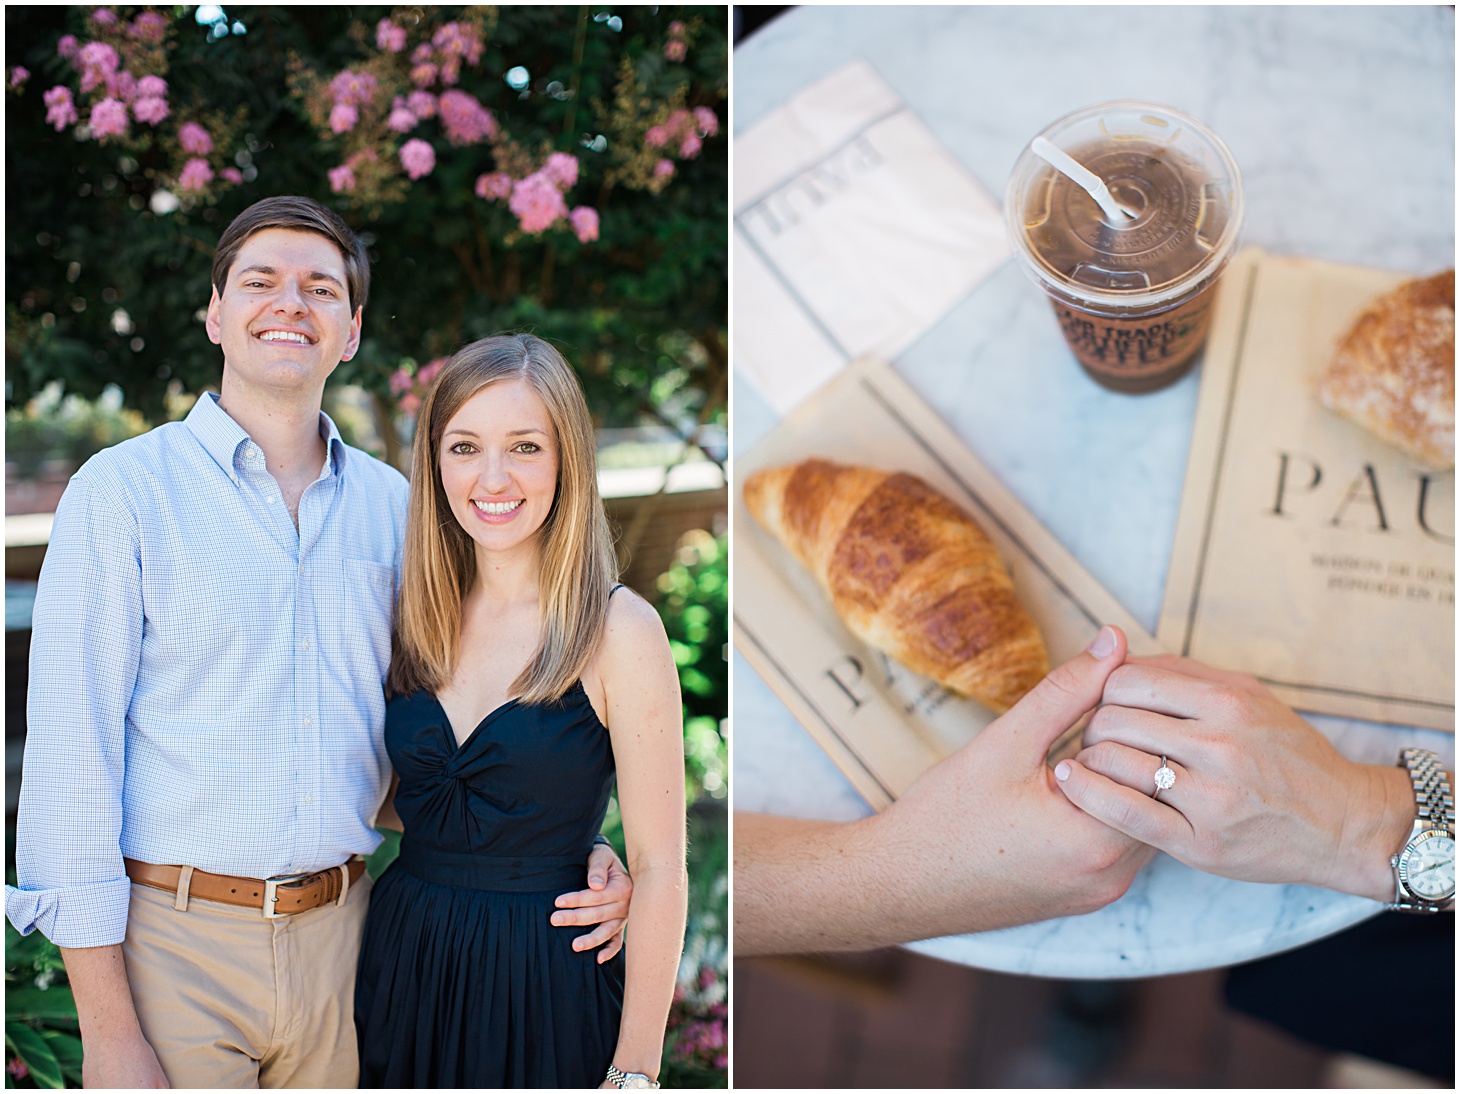 2015 - 2016 Best of Engagements by Sarah Bradshaw Photography in Washington DC